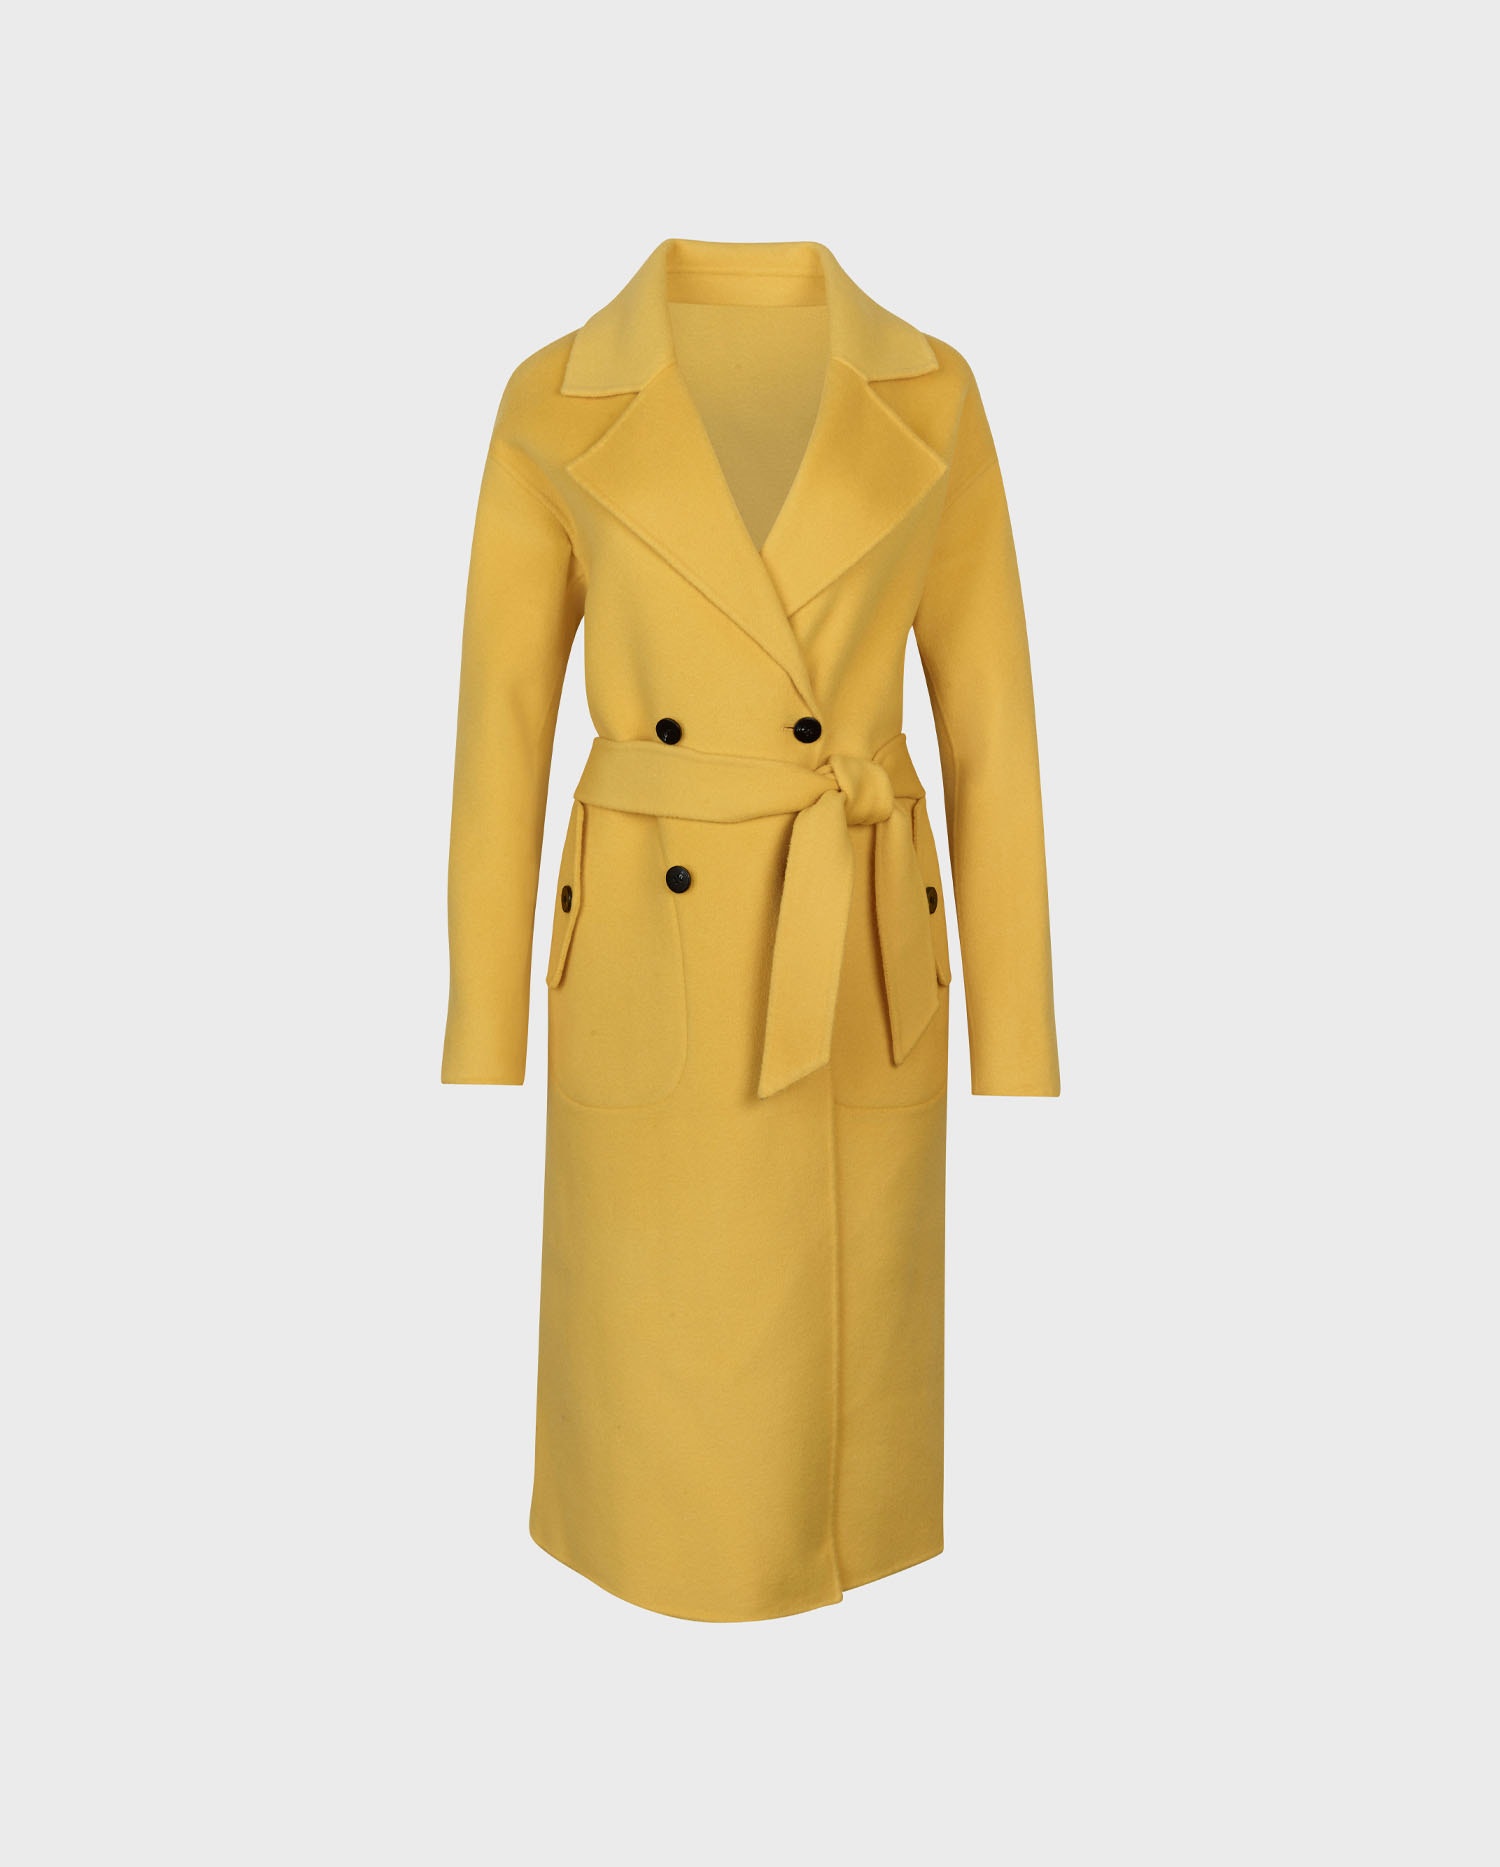 Discover the DIAPASON Classic yellow trench coat with removable belt tie from ANNE FONTAINE